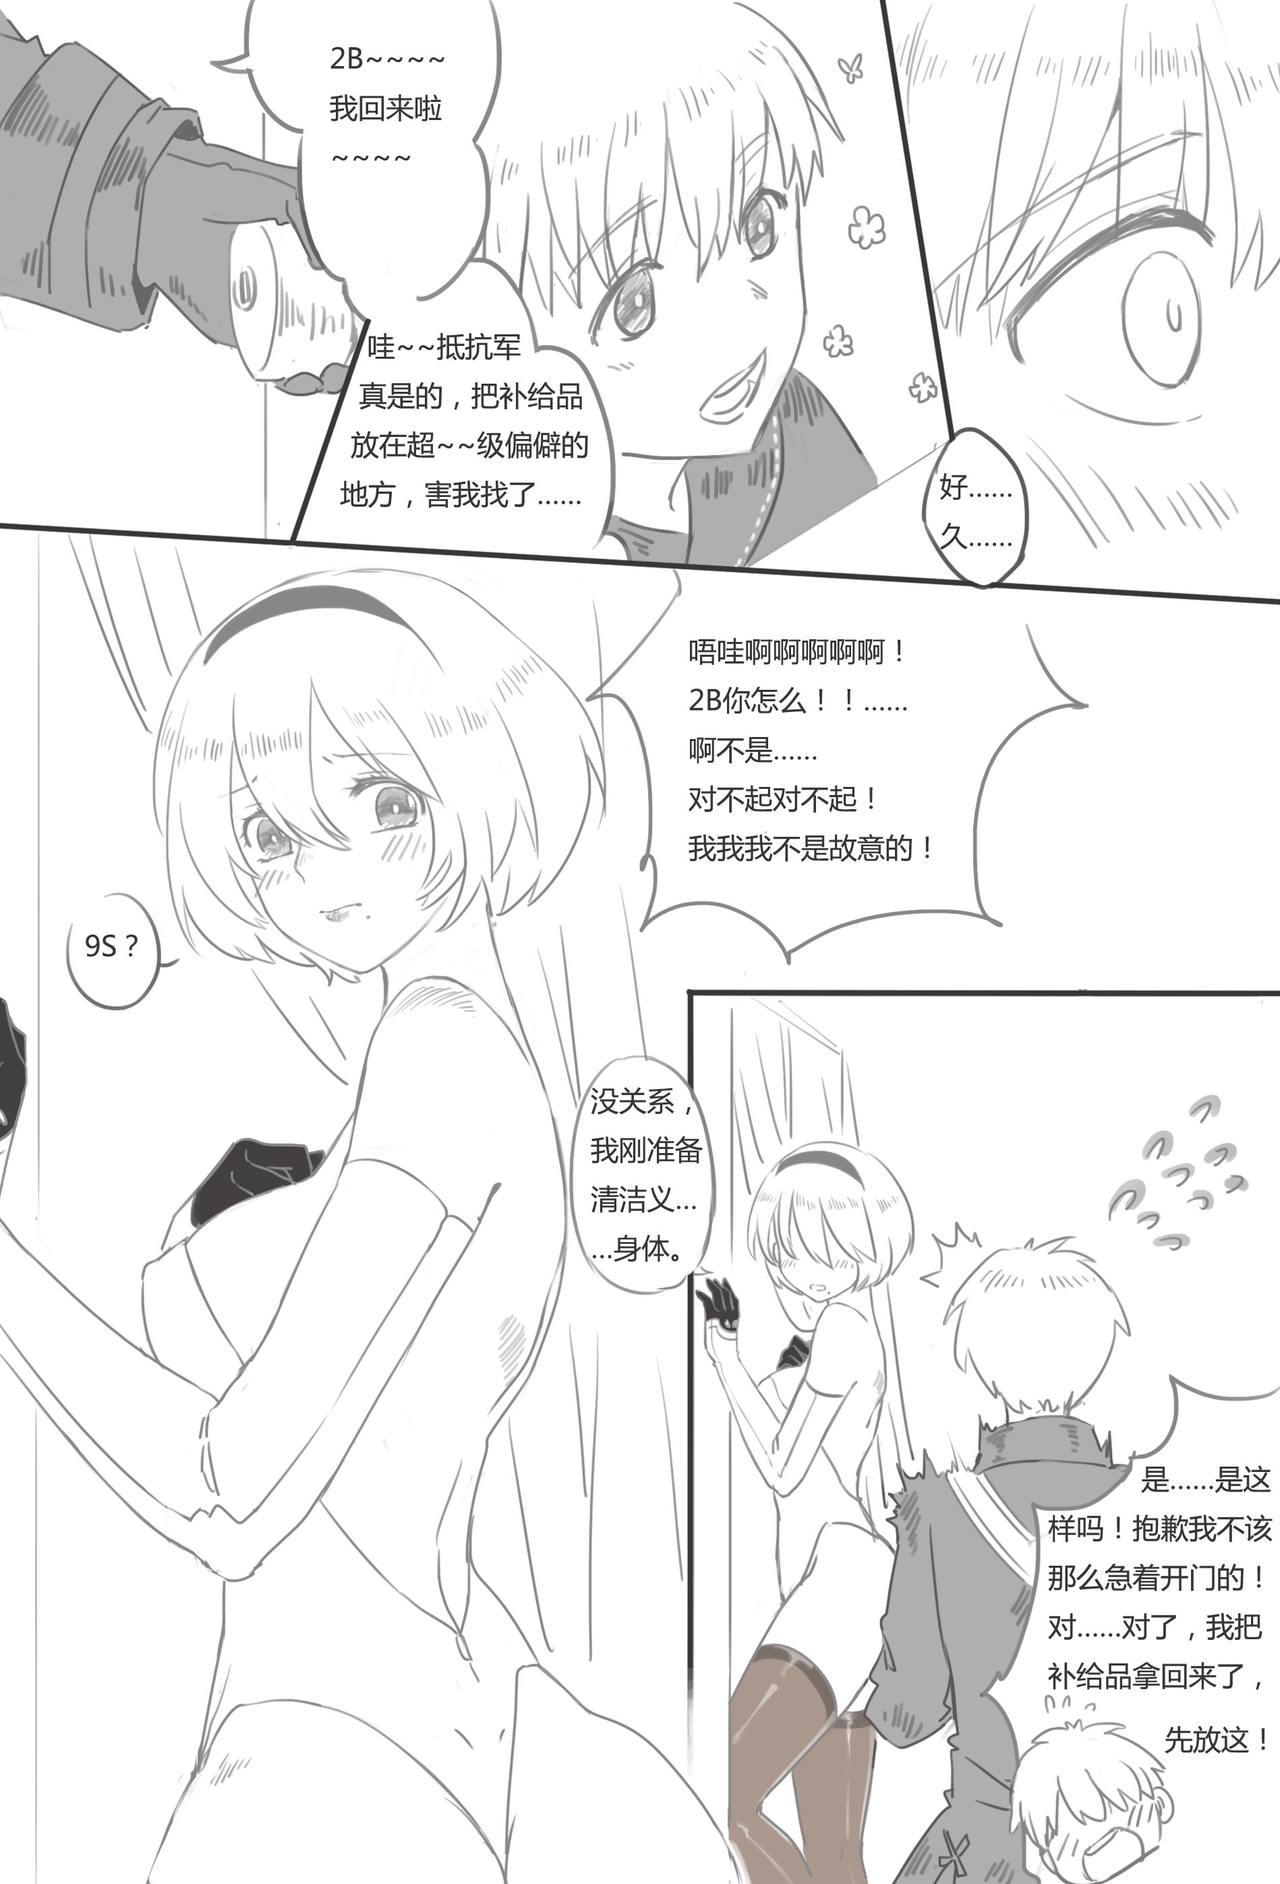 Jerk Off Instruction [WS] 9Sx2B - Life after the [E] end. (NieR:Automata) [Chinese] - Nier automata Sex Massage - Page 3